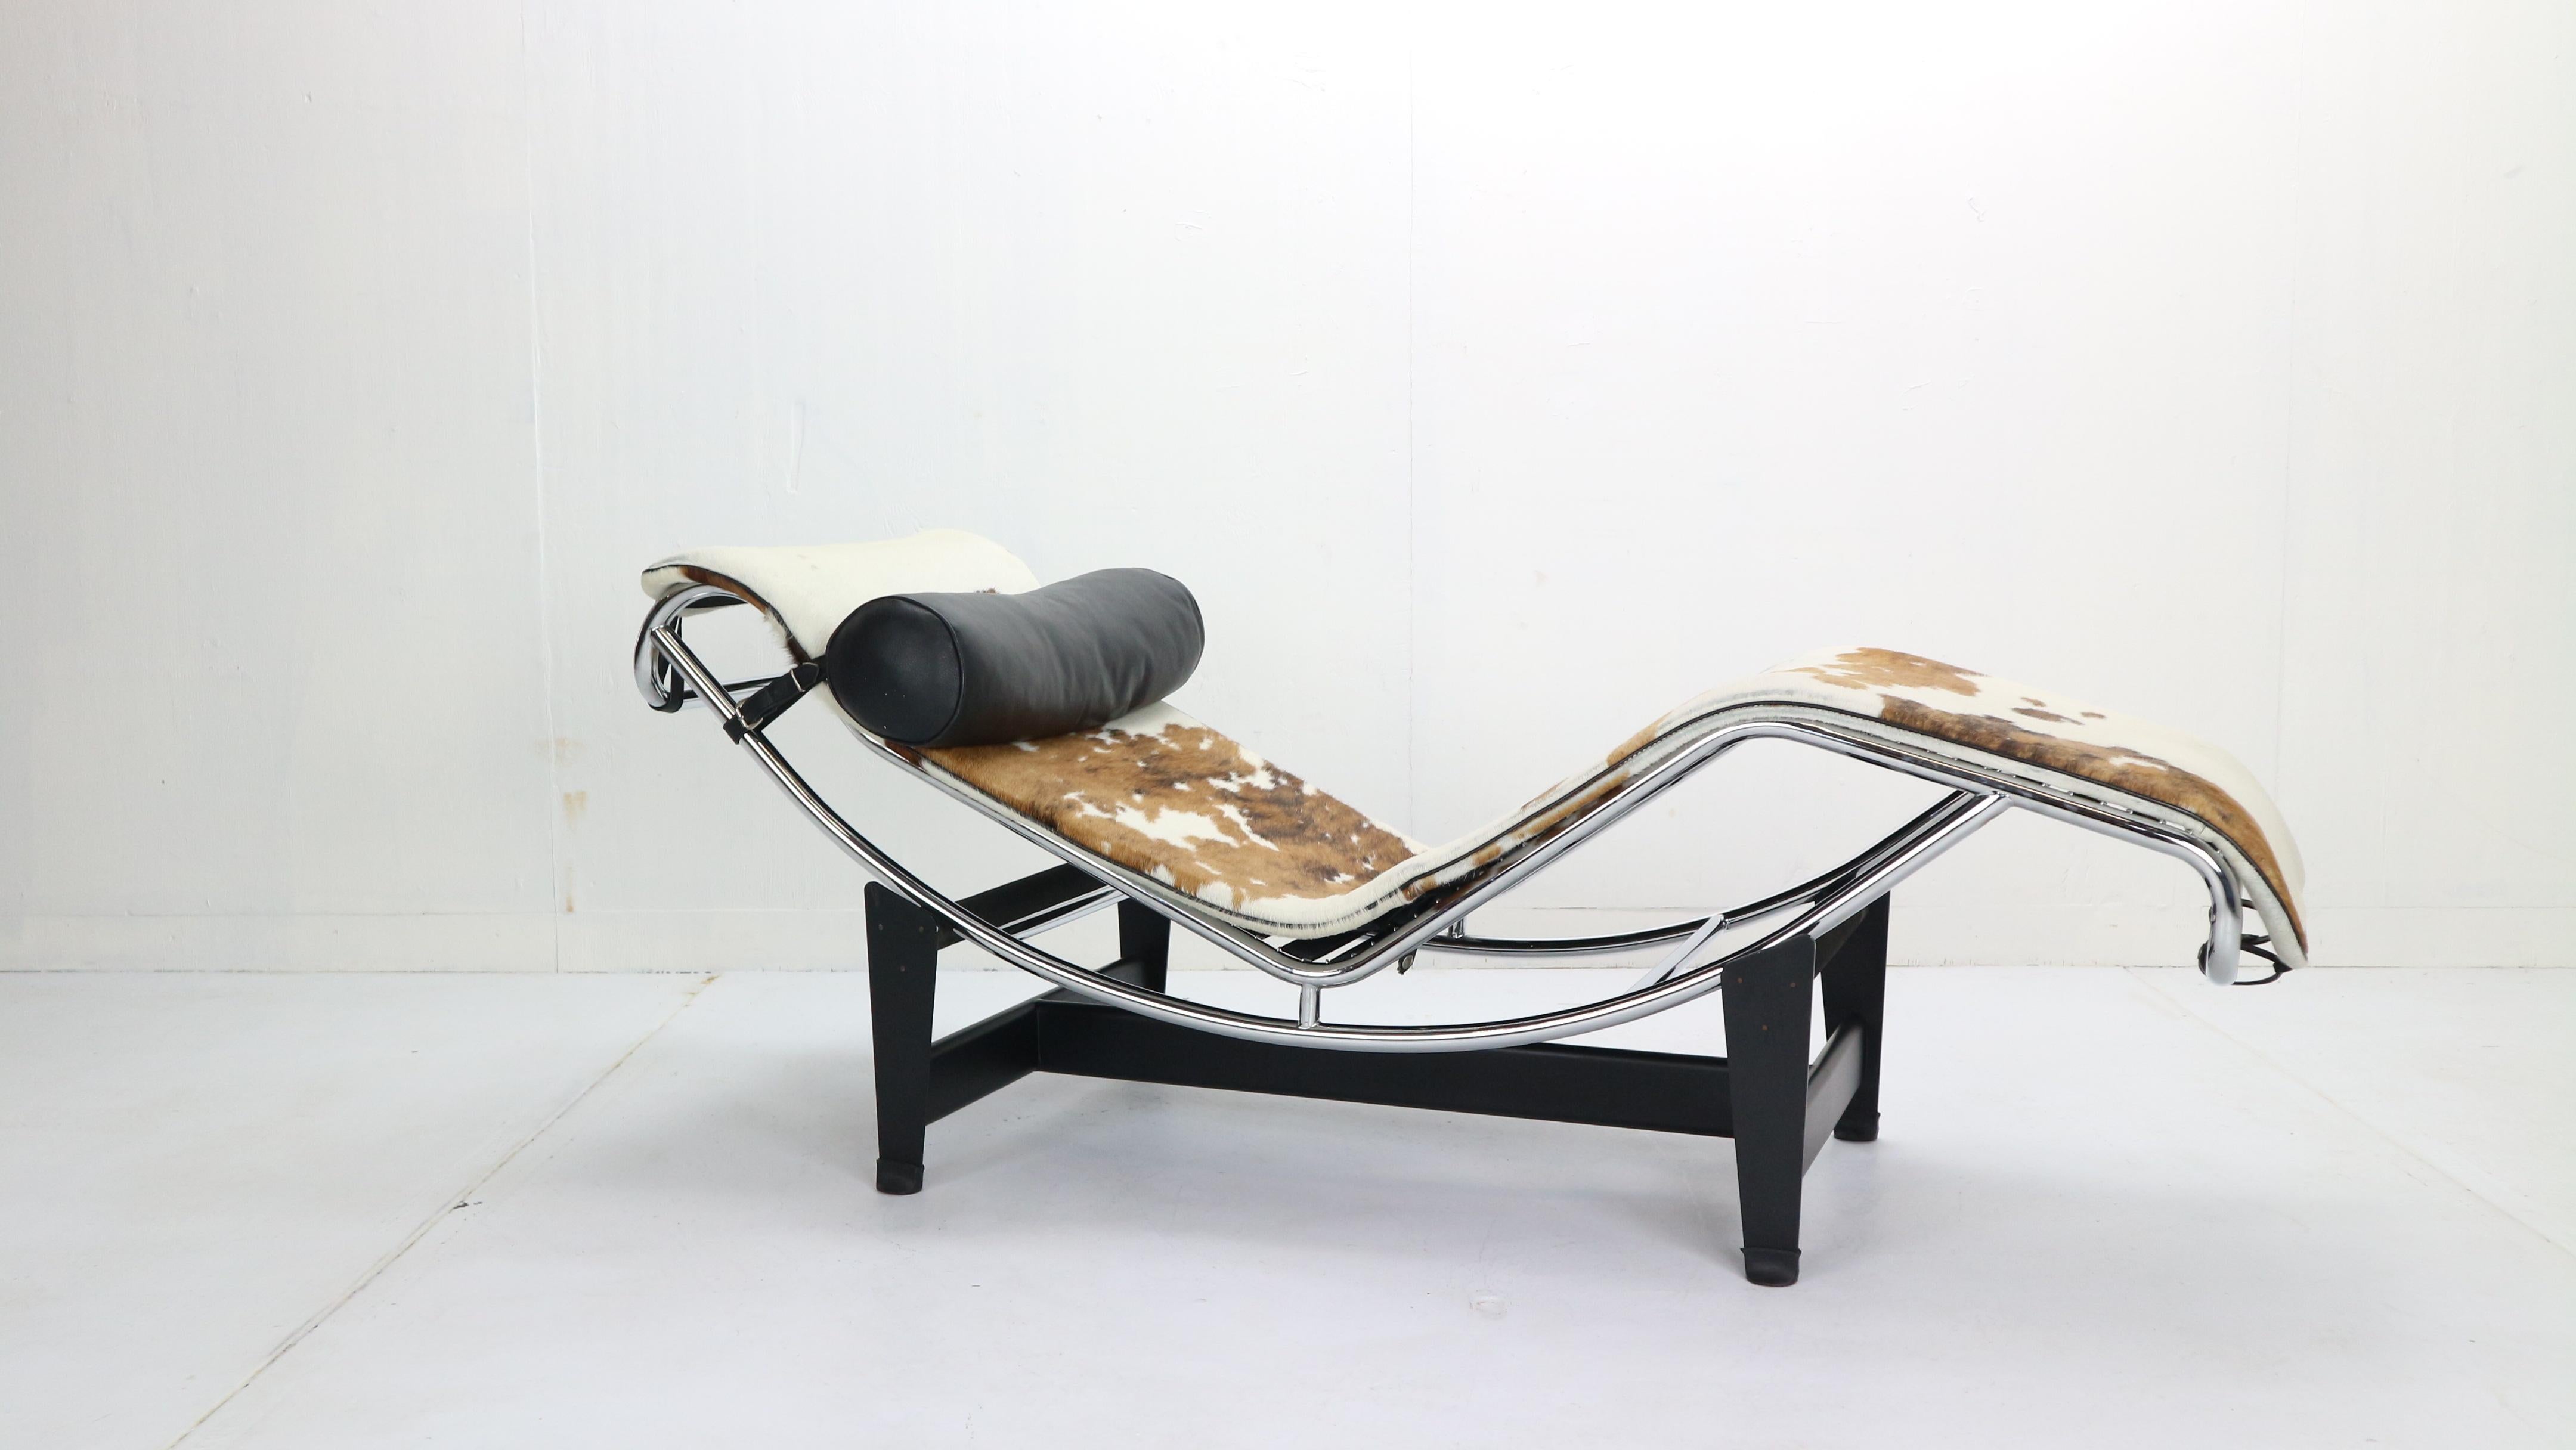 Le Corbusier Jeanneret And Charlotte Perriand Lc4 Chaise Lounge - 3 For  Sale on 1stDibs | le corbusier chair, corbusier chair, lc4 chaise longue  original